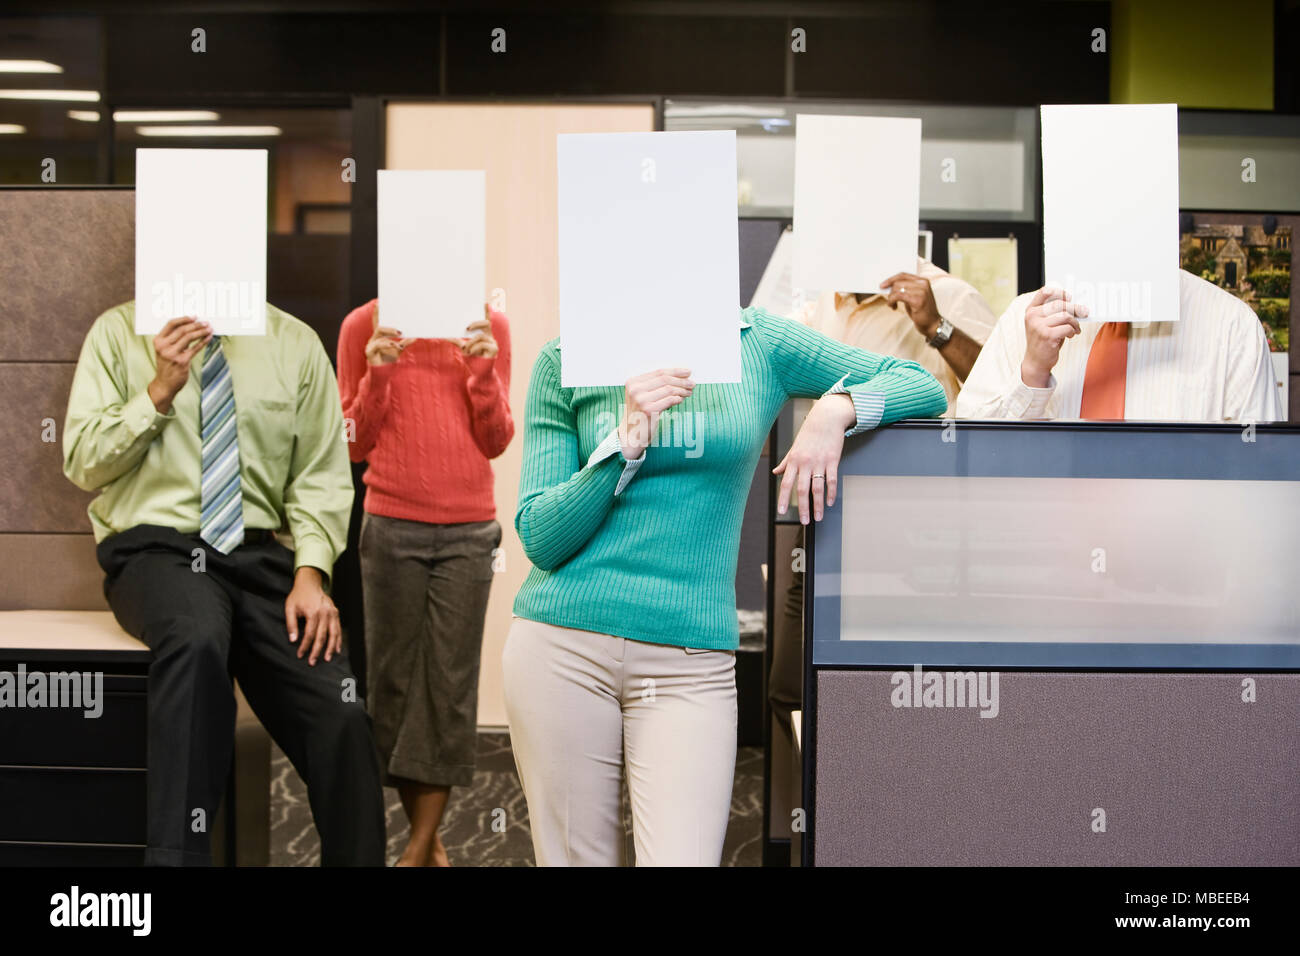 Team of business people standing with blank pieces of paper in front of their faces. Stock Photo